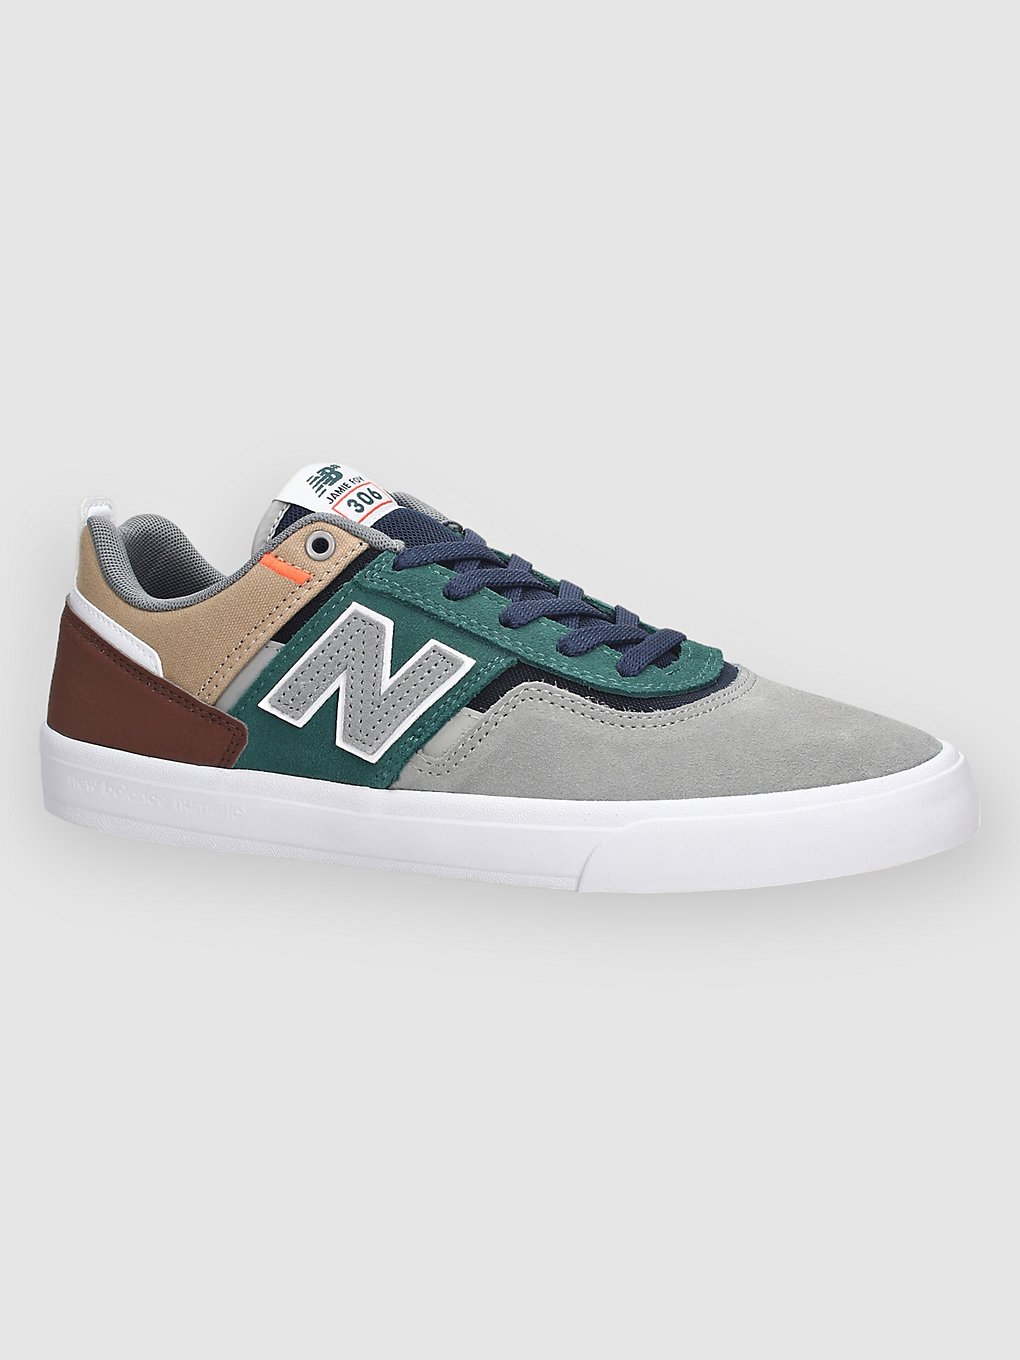 new balance numeric 306 skate shoes teal